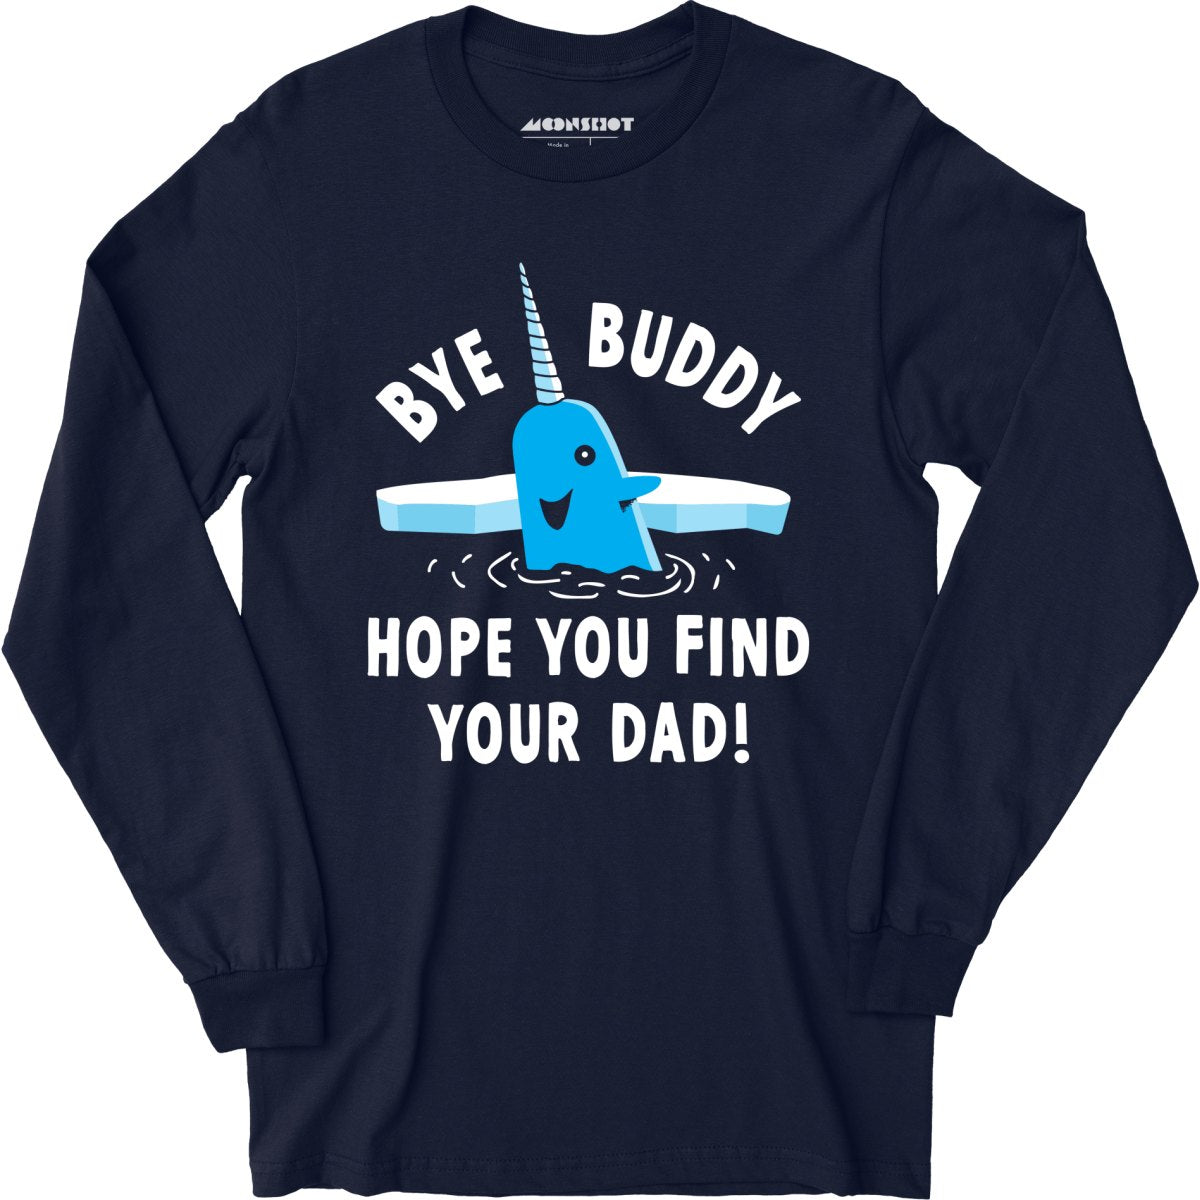 Bye Buddy Hope You Find Your Dad - Long Sleeve T-Shirt